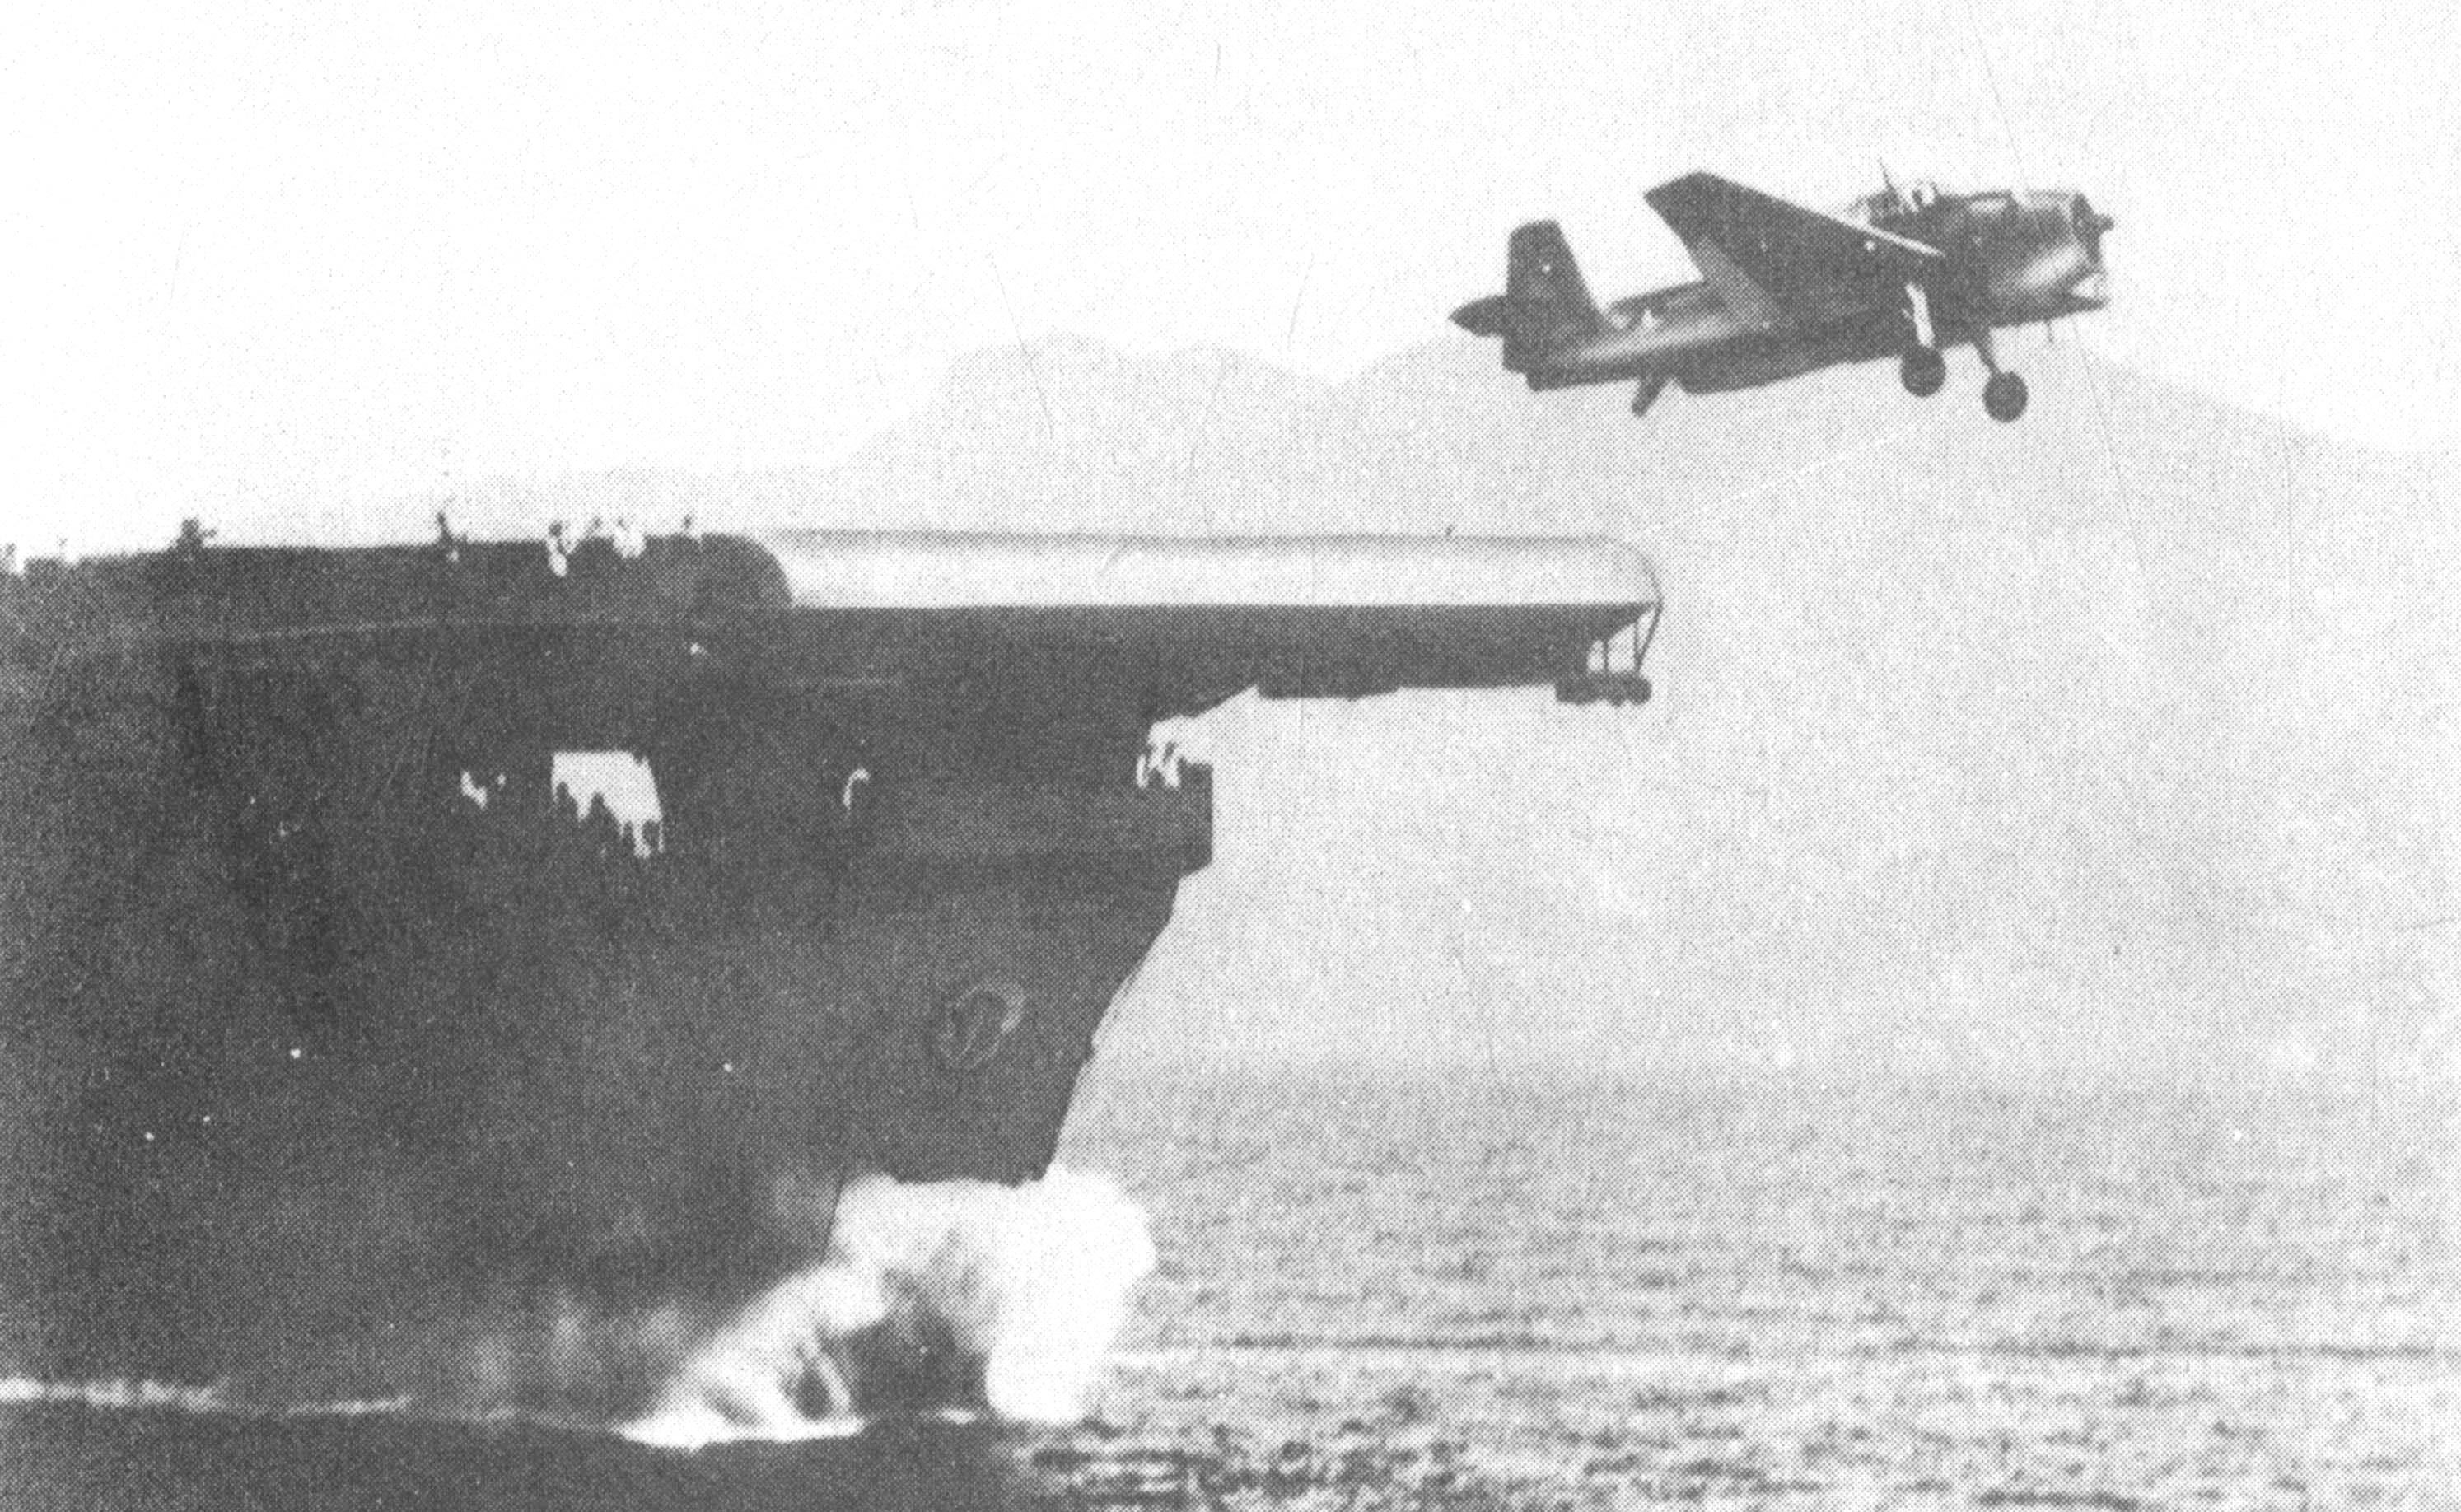 During World War II, a Grumman Avenger takes off from an aircraft carrier in the South Pacific.